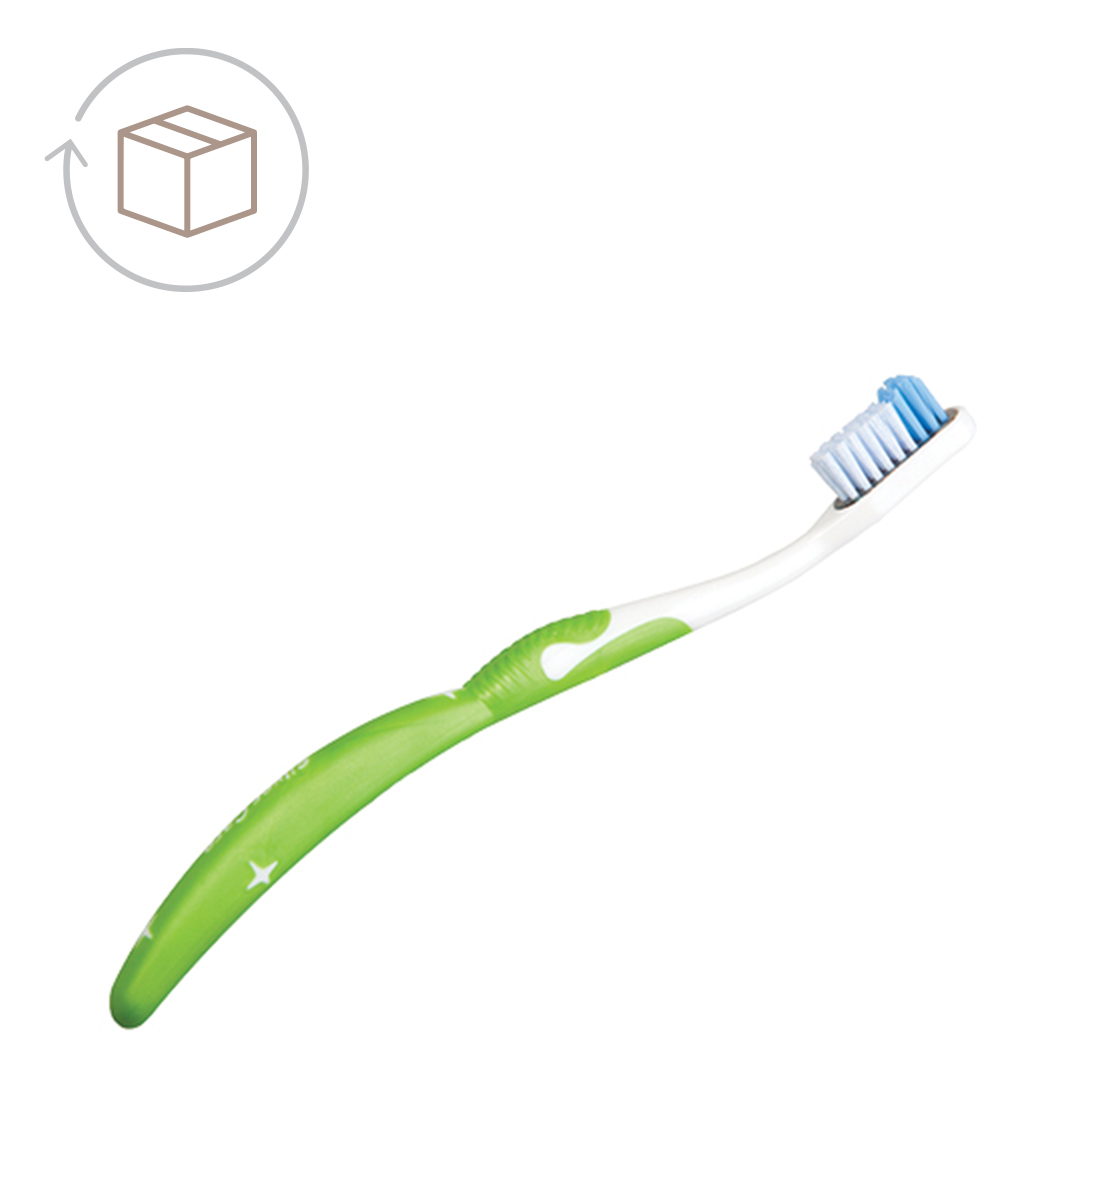 Adult Silver Care Medium Toothbrush, green